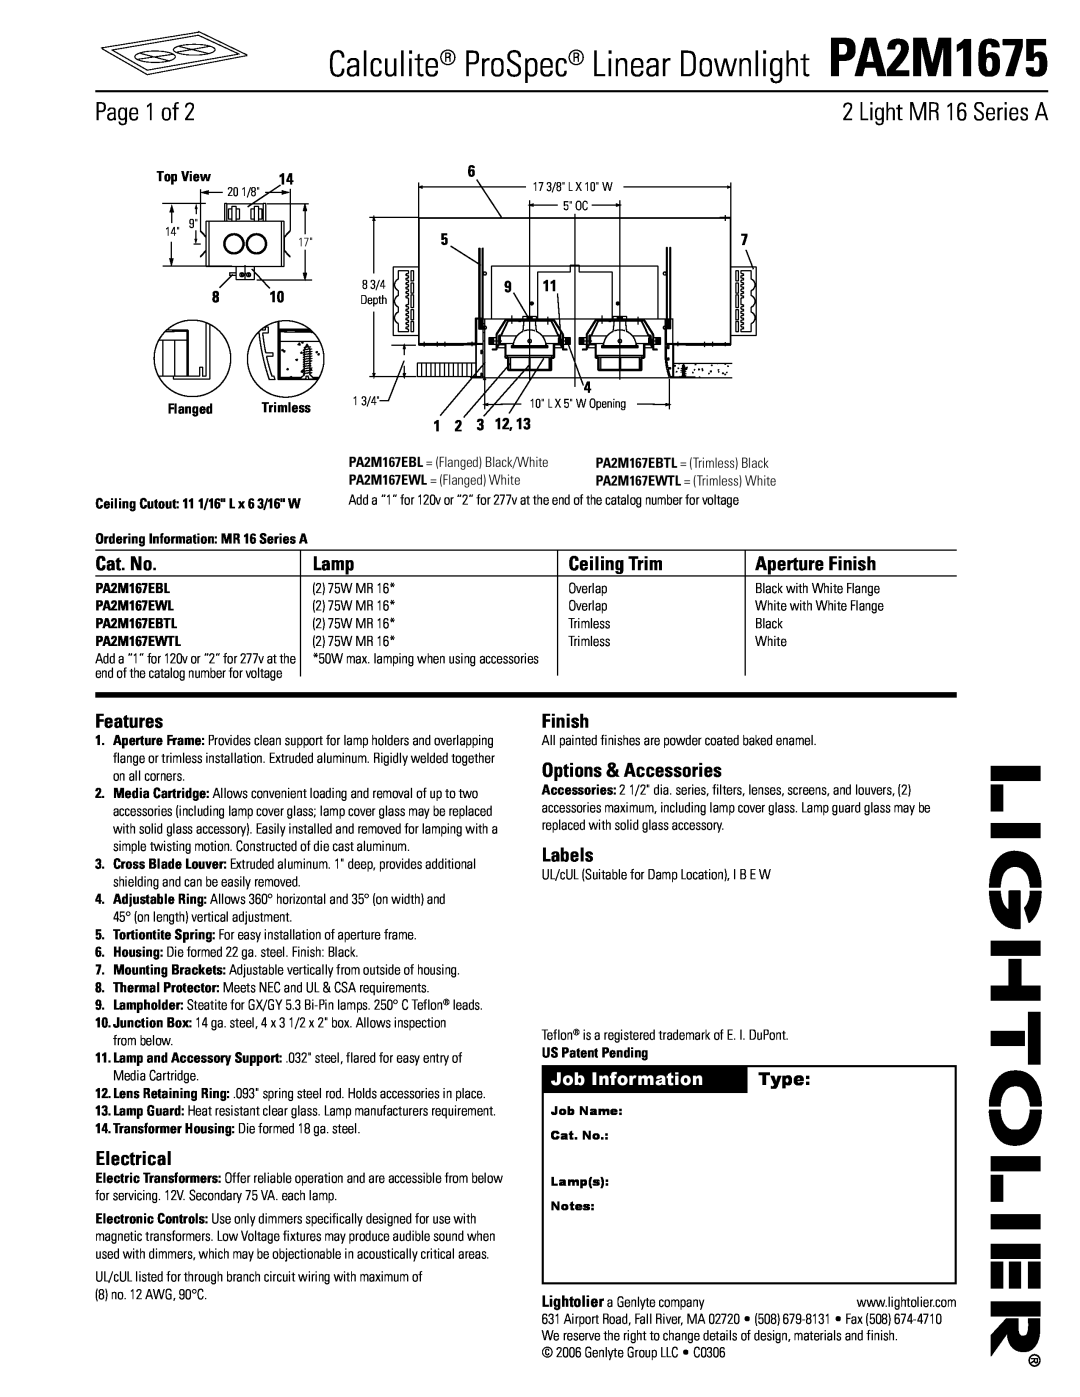 Lightolier manual Calculite ProSpec Linear Downlight PA2M1675, Page 1 of, Light MR 16 Series A, Cat. No, Lamp, Features 